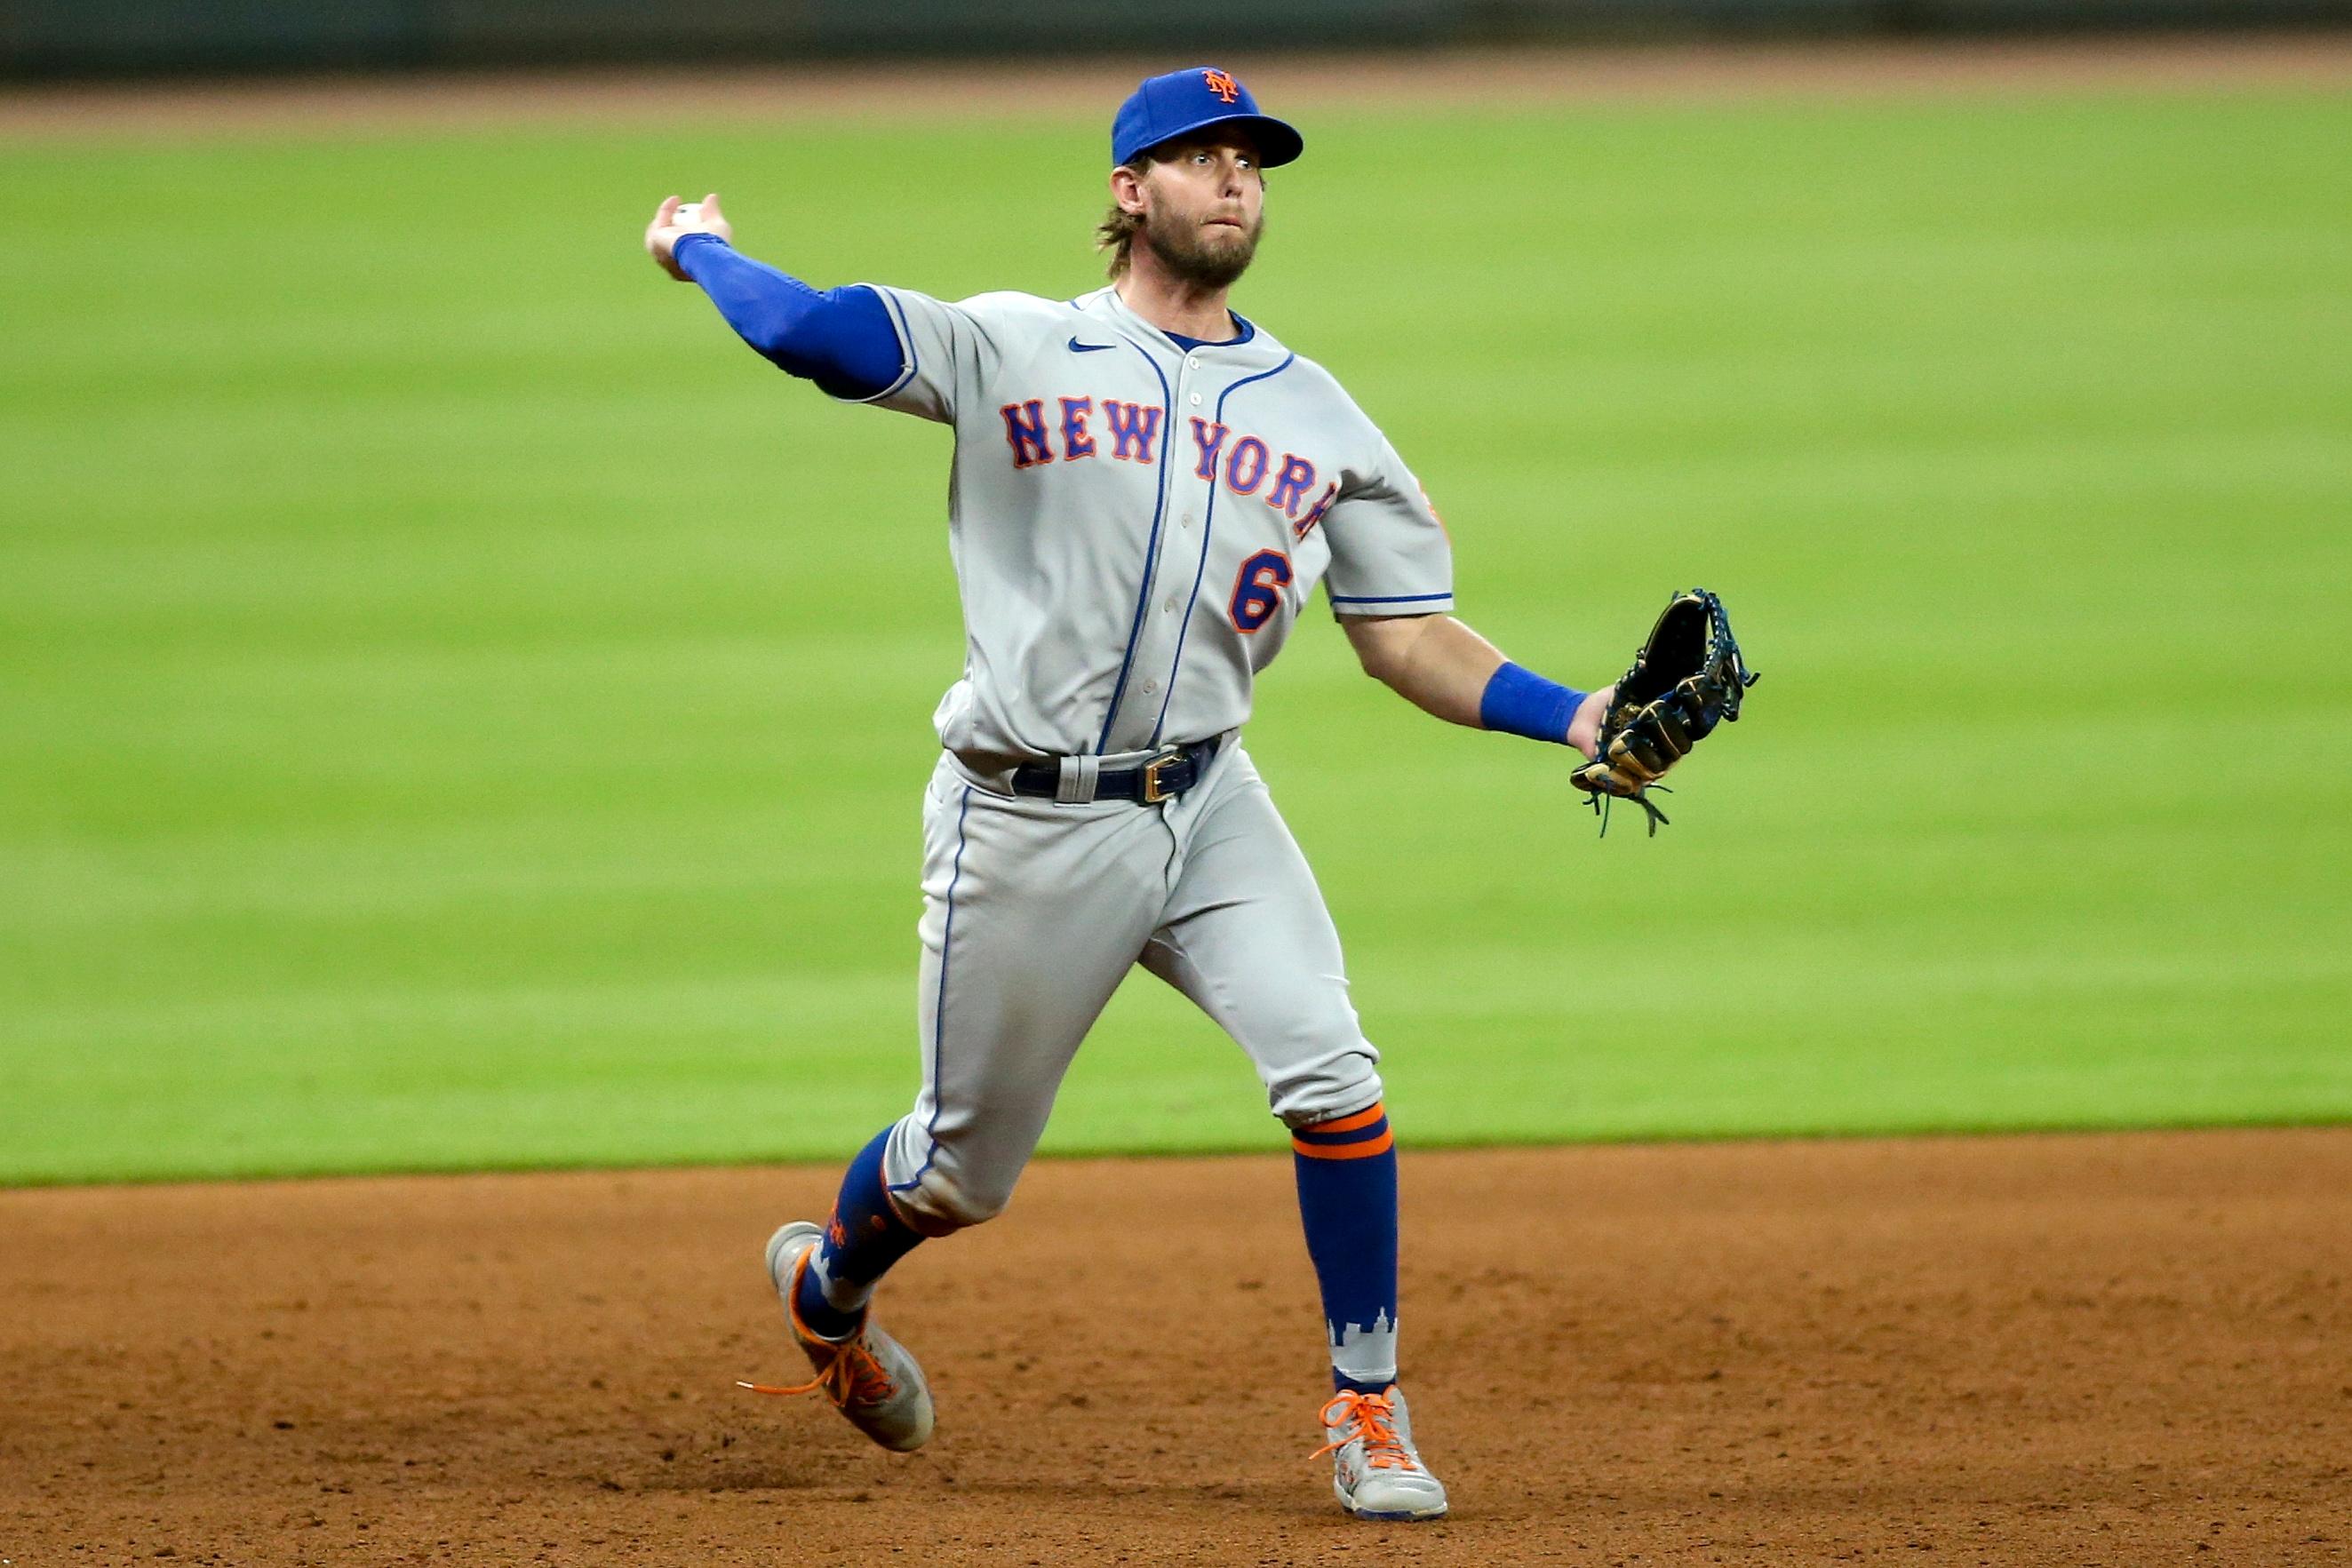 Aug 1, 2020; Atlanta, Georgia, USA; New York Mets third baseman Jeff McNeil (6) throws a runner out at first against the Atlanta Braves in the eighth inning at Truist Park. Mandatory Credit: Brett Davis-USA TODAY Sports / © Brett Davis-USA TODAY Sports